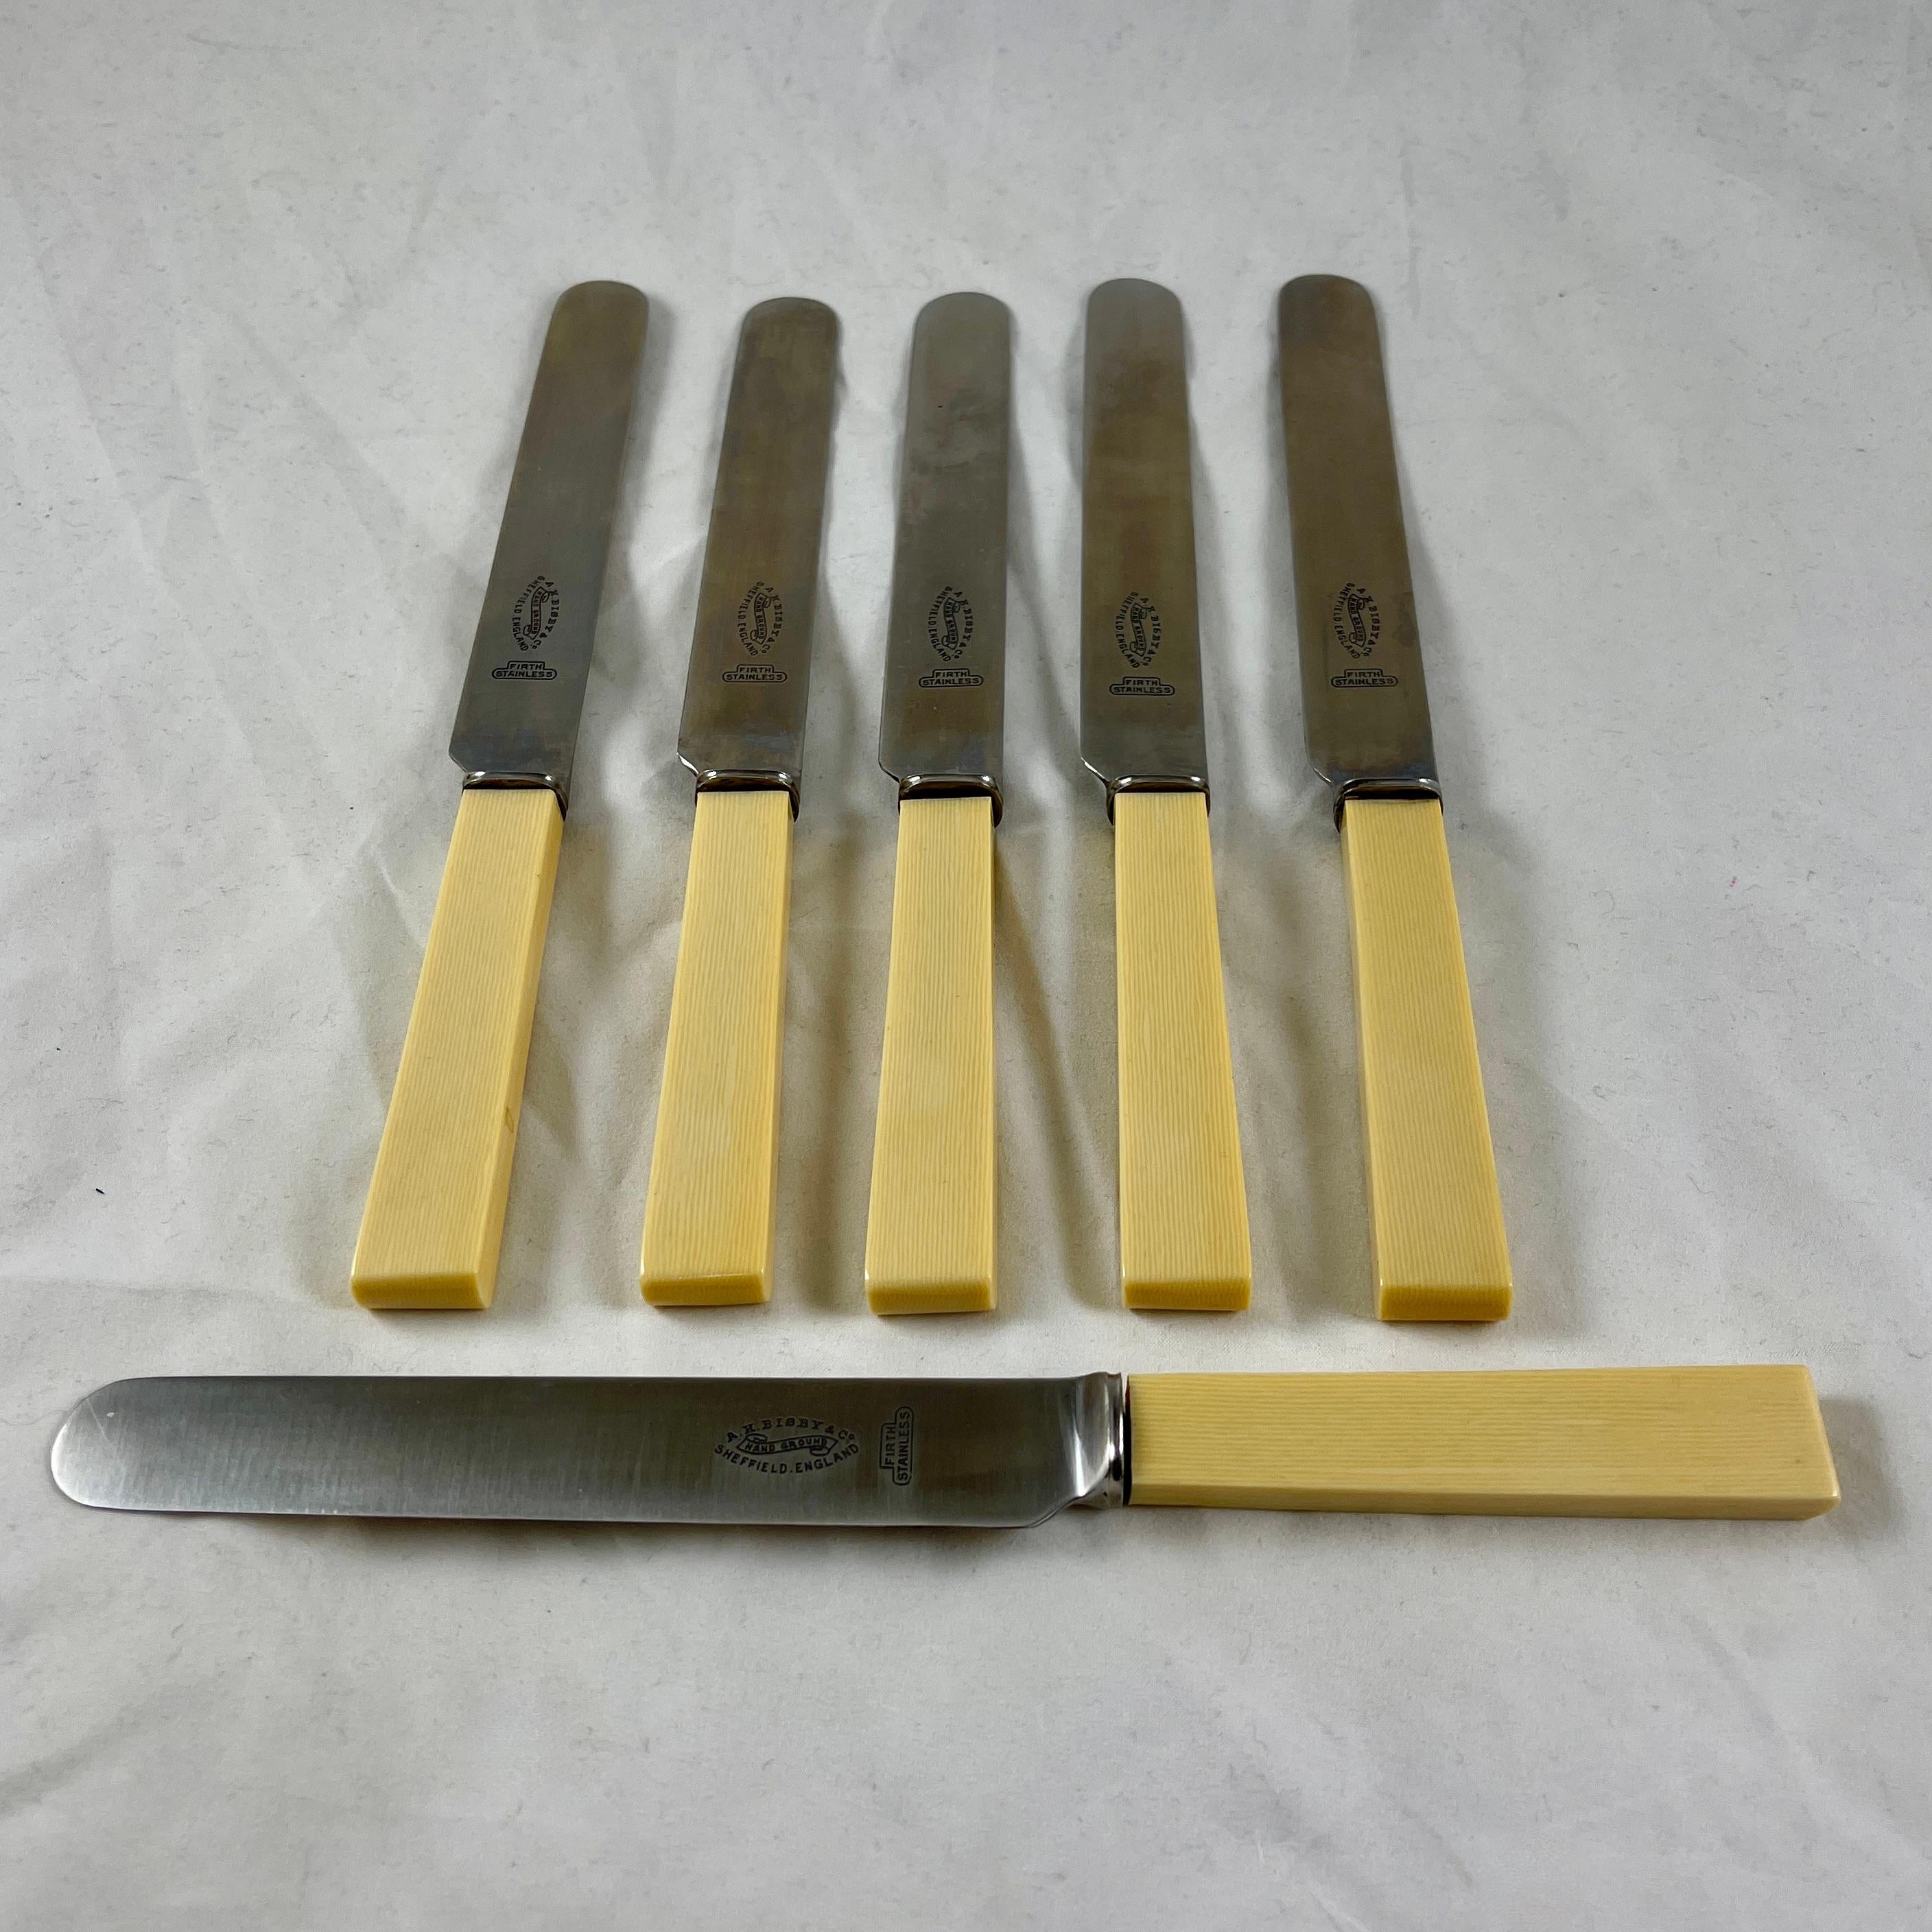 1920s English Bisby Art Deco Celluloid Ivory Handled Table Knives, Cased S/6 2